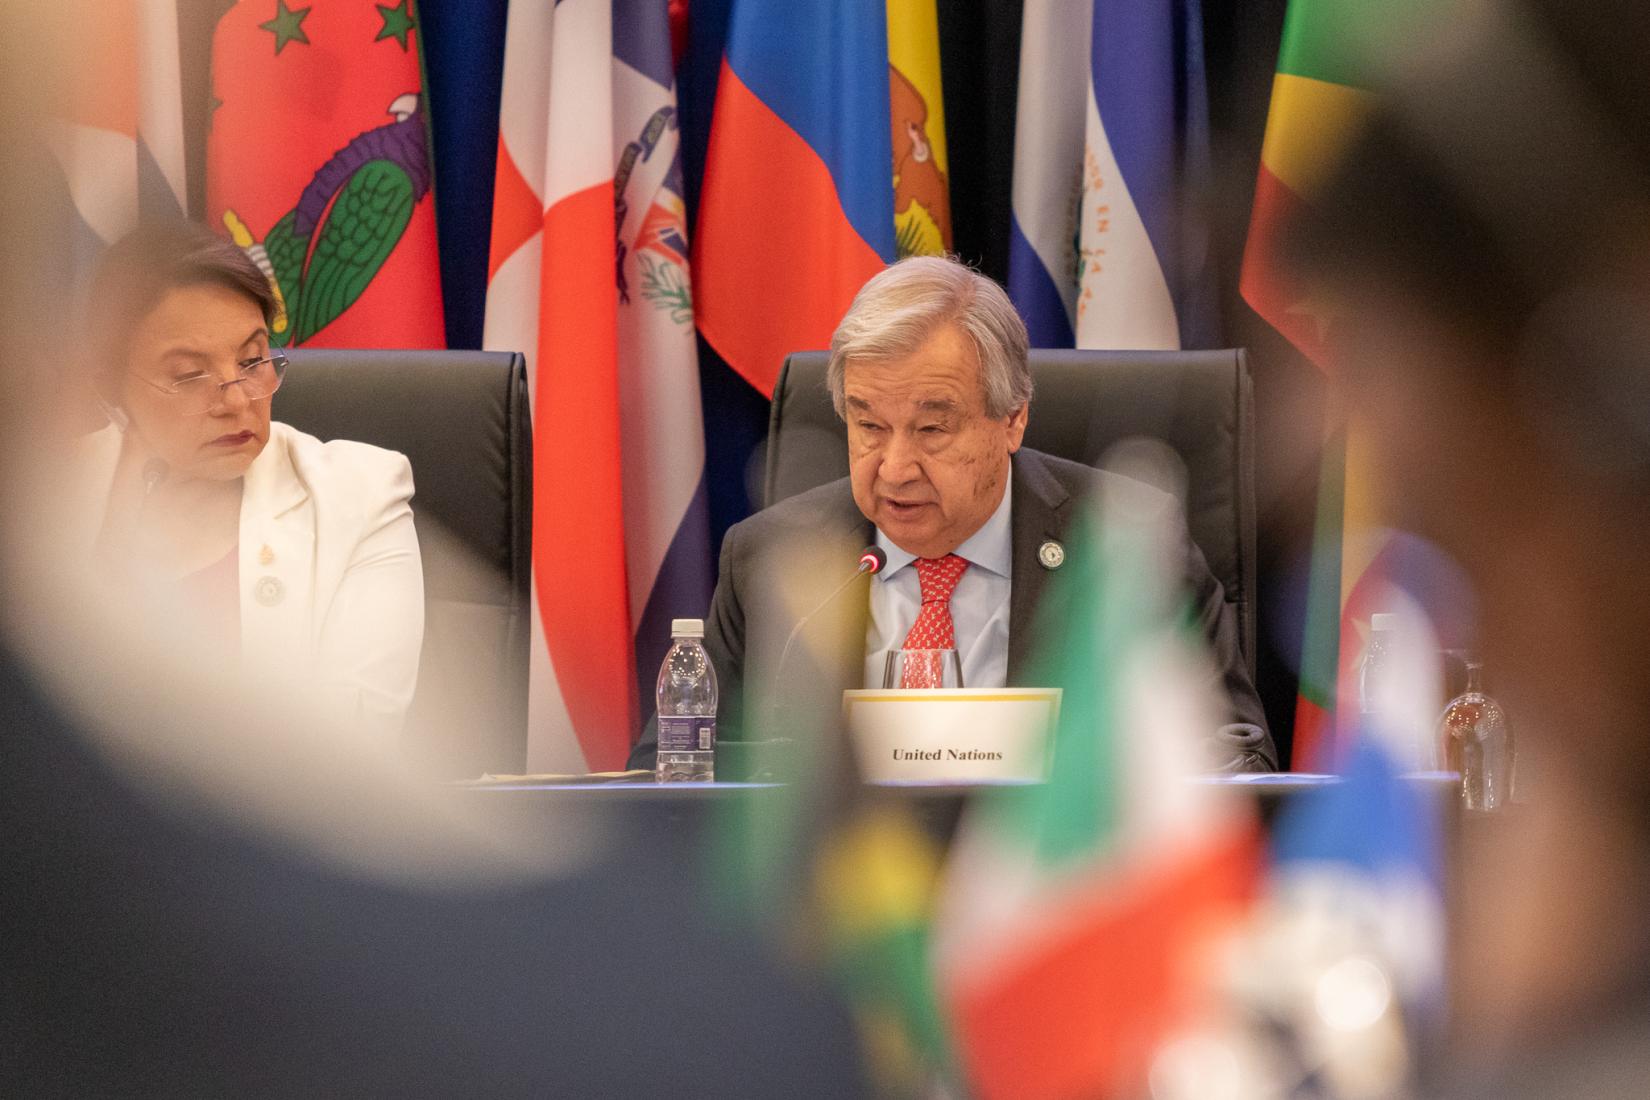 Man at table in suit speaks to an audience with flags in the background